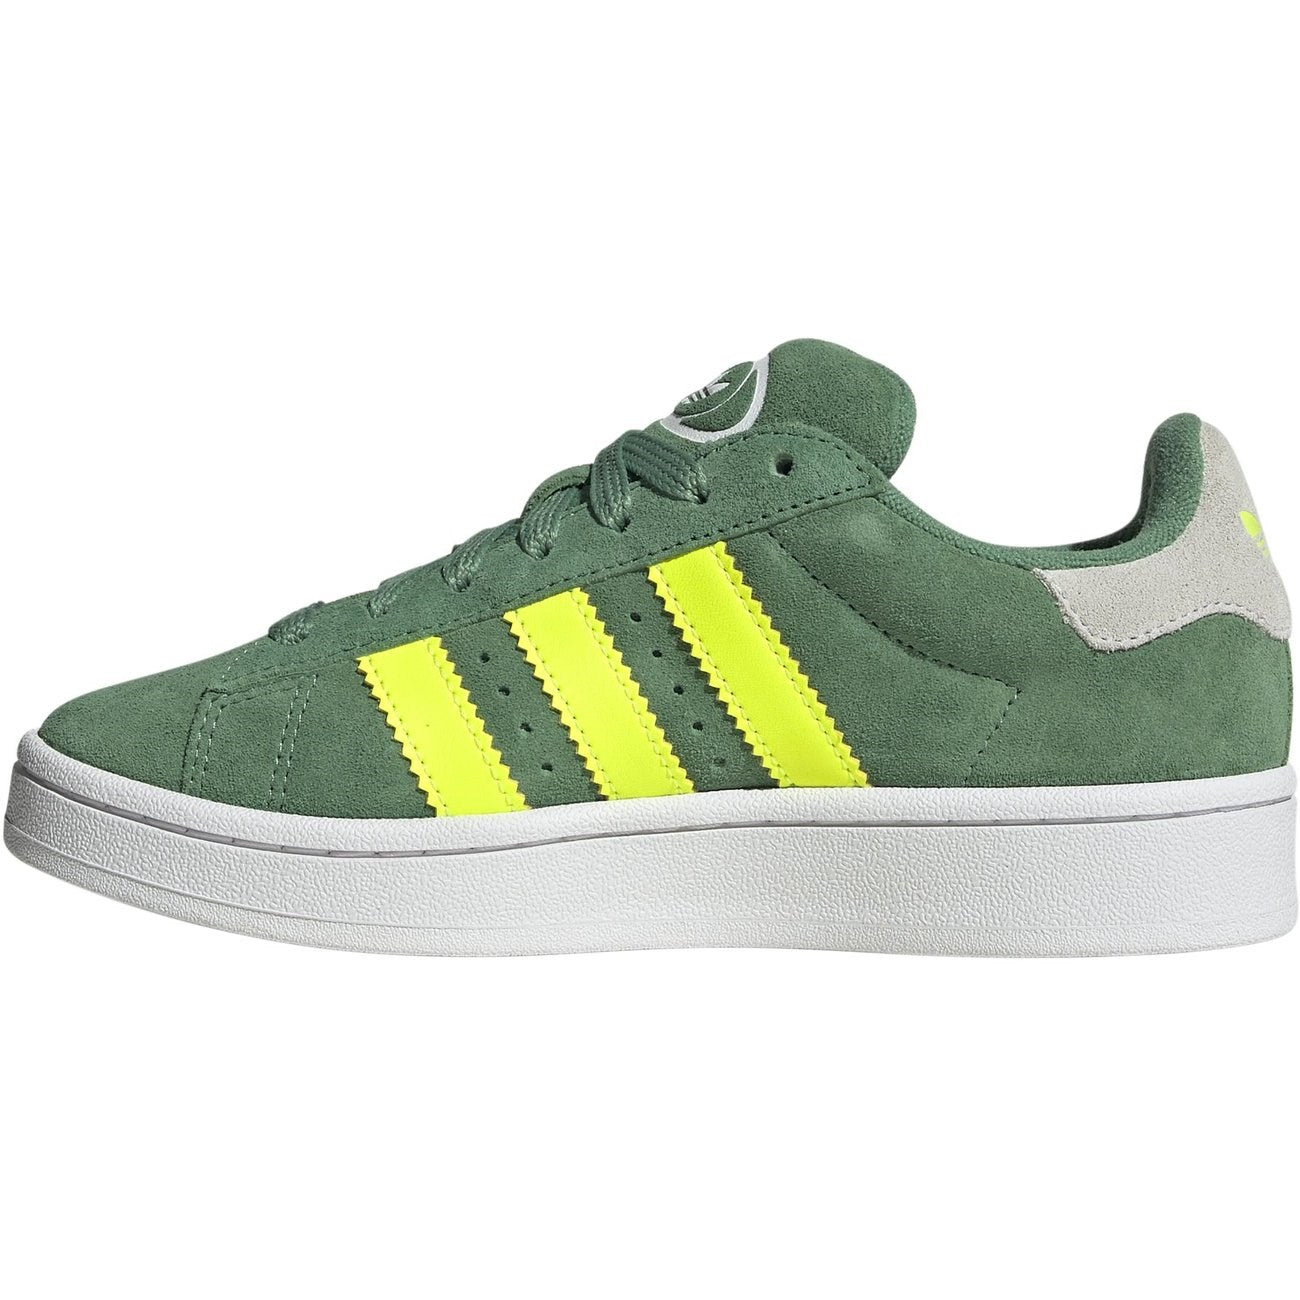 adidas Originals CAMPUS 00s J Sneakers Preloved Green / Solar Yellow / Cloud White 5